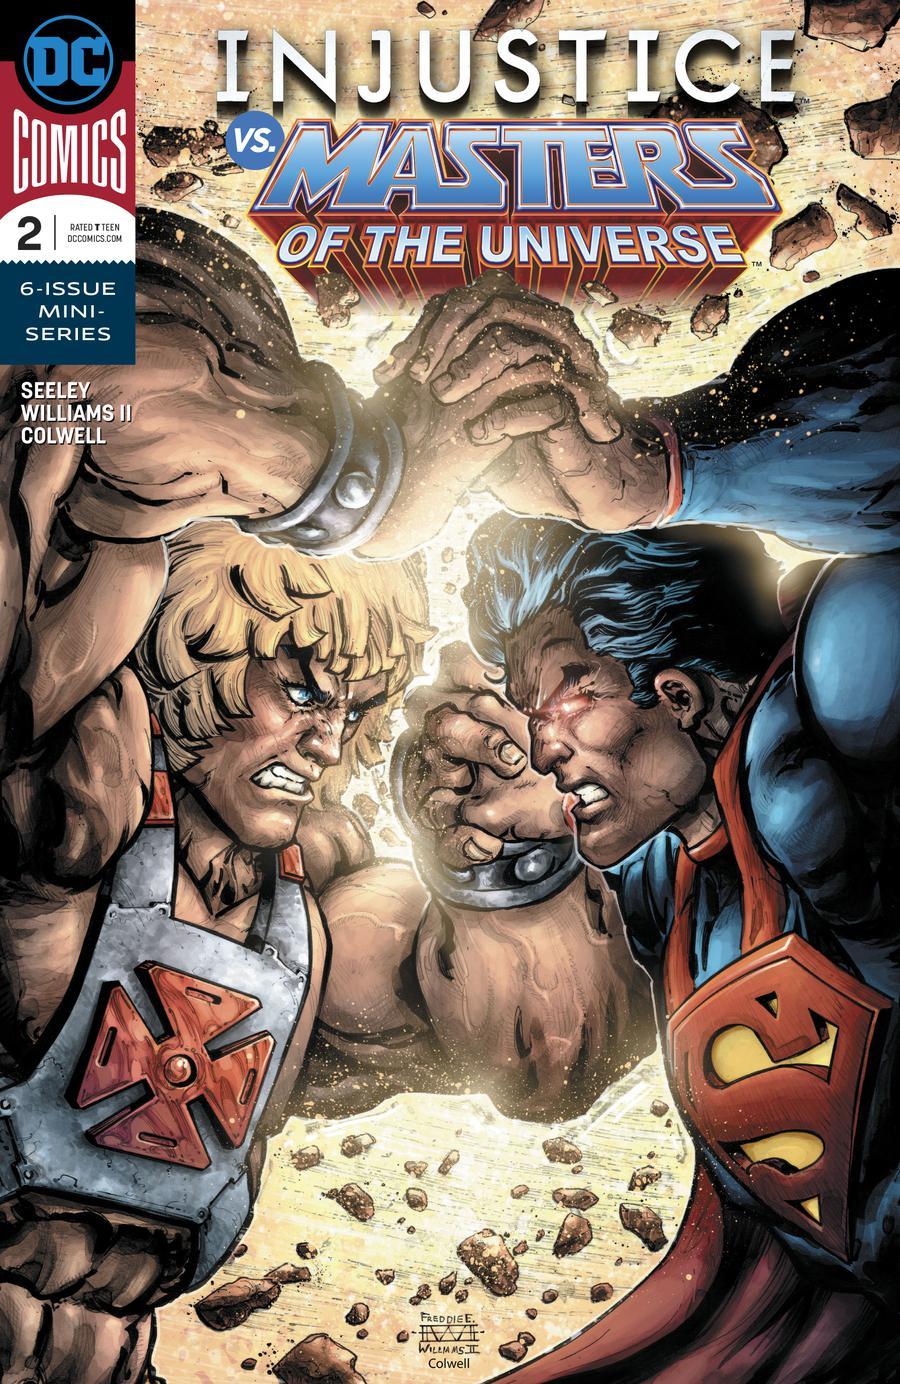 Injustice vs The Masters Of The Universe Vol. 1 #2